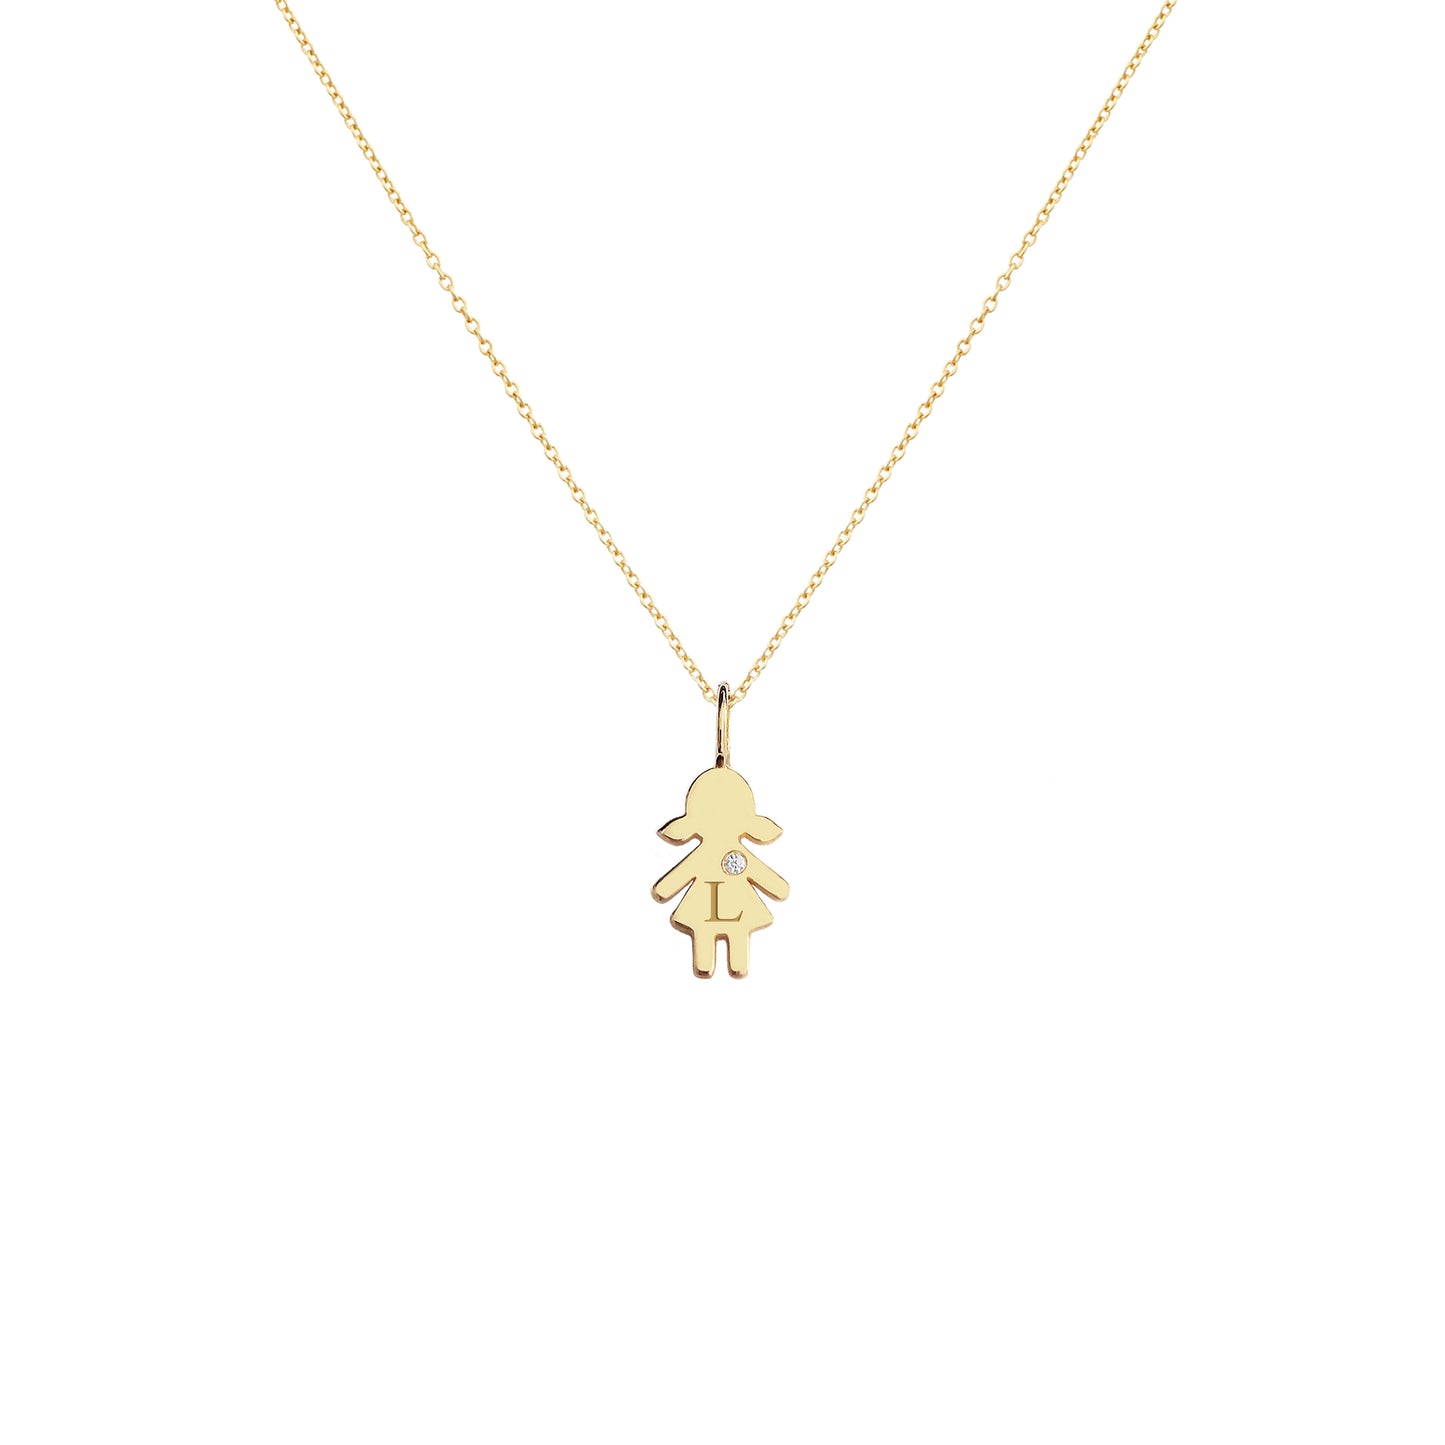 14K 9K Solid Gold Personalized Tiny Girl Kid Diamond Pendant Charm Necklace